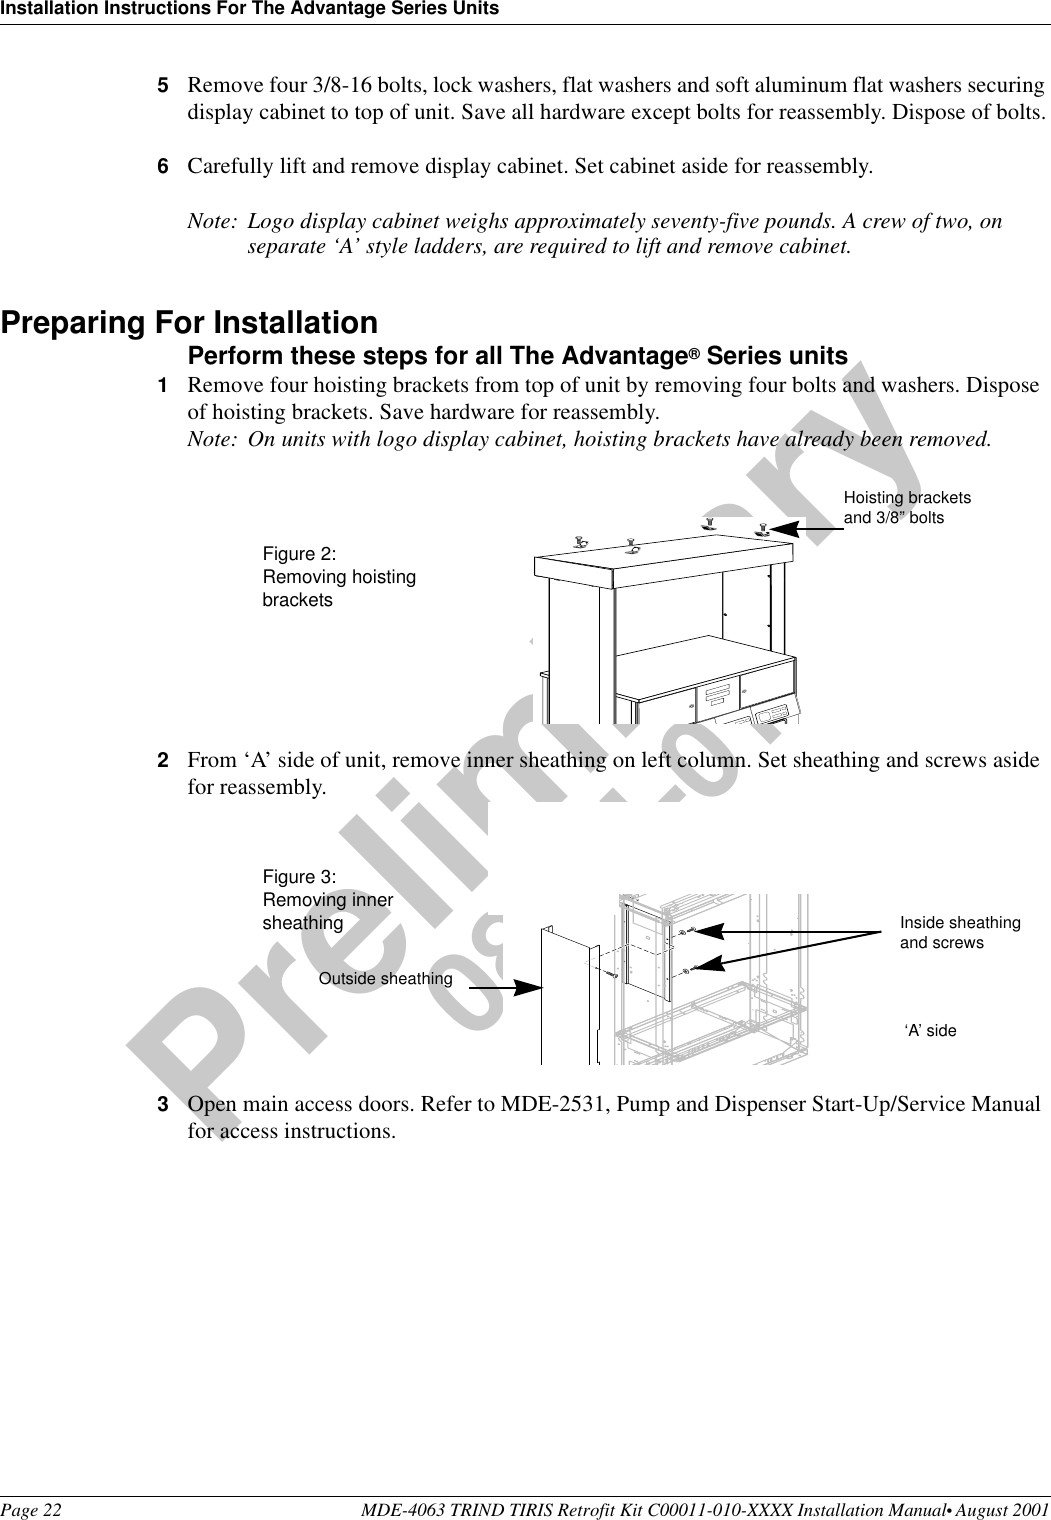 Installation Instructions For The Advantage Series UnitsPage 22 MDE-4063 TRIND TIRIS Retrofit Kit C00011-010-XXXX Installation Manual• August 2001Preliminary08-24-015Remove four 3/8-16 bolts, lock washers, flat washers and soft aluminum flat washers securing display cabinet to top of unit. Save all hardware except bolts for reassembly. Dispose of bolts.6Carefully lift and remove display cabinet. Set cabinet aside for reassembly.Note: Logo display cabinet weighs approximately seventy-five pounds. A crew of two, on separate ‘A’ style ladders, are required to lift and remove cabinet.Preparing For InstallationPerform these steps for all The Advantage® Series units1Remove four hoisting brackets from top of unit by removing four bolts and washers. Dispose of hoisting brackets. Save hardware for reassembly. Note: On units with logo display cabinet, hoisting brackets have already been removed. 2From ‘A’ side of unit, remove inner sheathing on left column. Set sheathing and screws aside for reassembly.3Open main access doors. Refer to MDE-2531, Pump and Dispenser Start-Up/Service Manual for access instructions.Hoisting bracketsand 3/8” boltsFigure 2: Removing hoisting bracketsInside sheathing and screws  ‘A’ side Figure 3:Removing innersheathingOutside sheathing